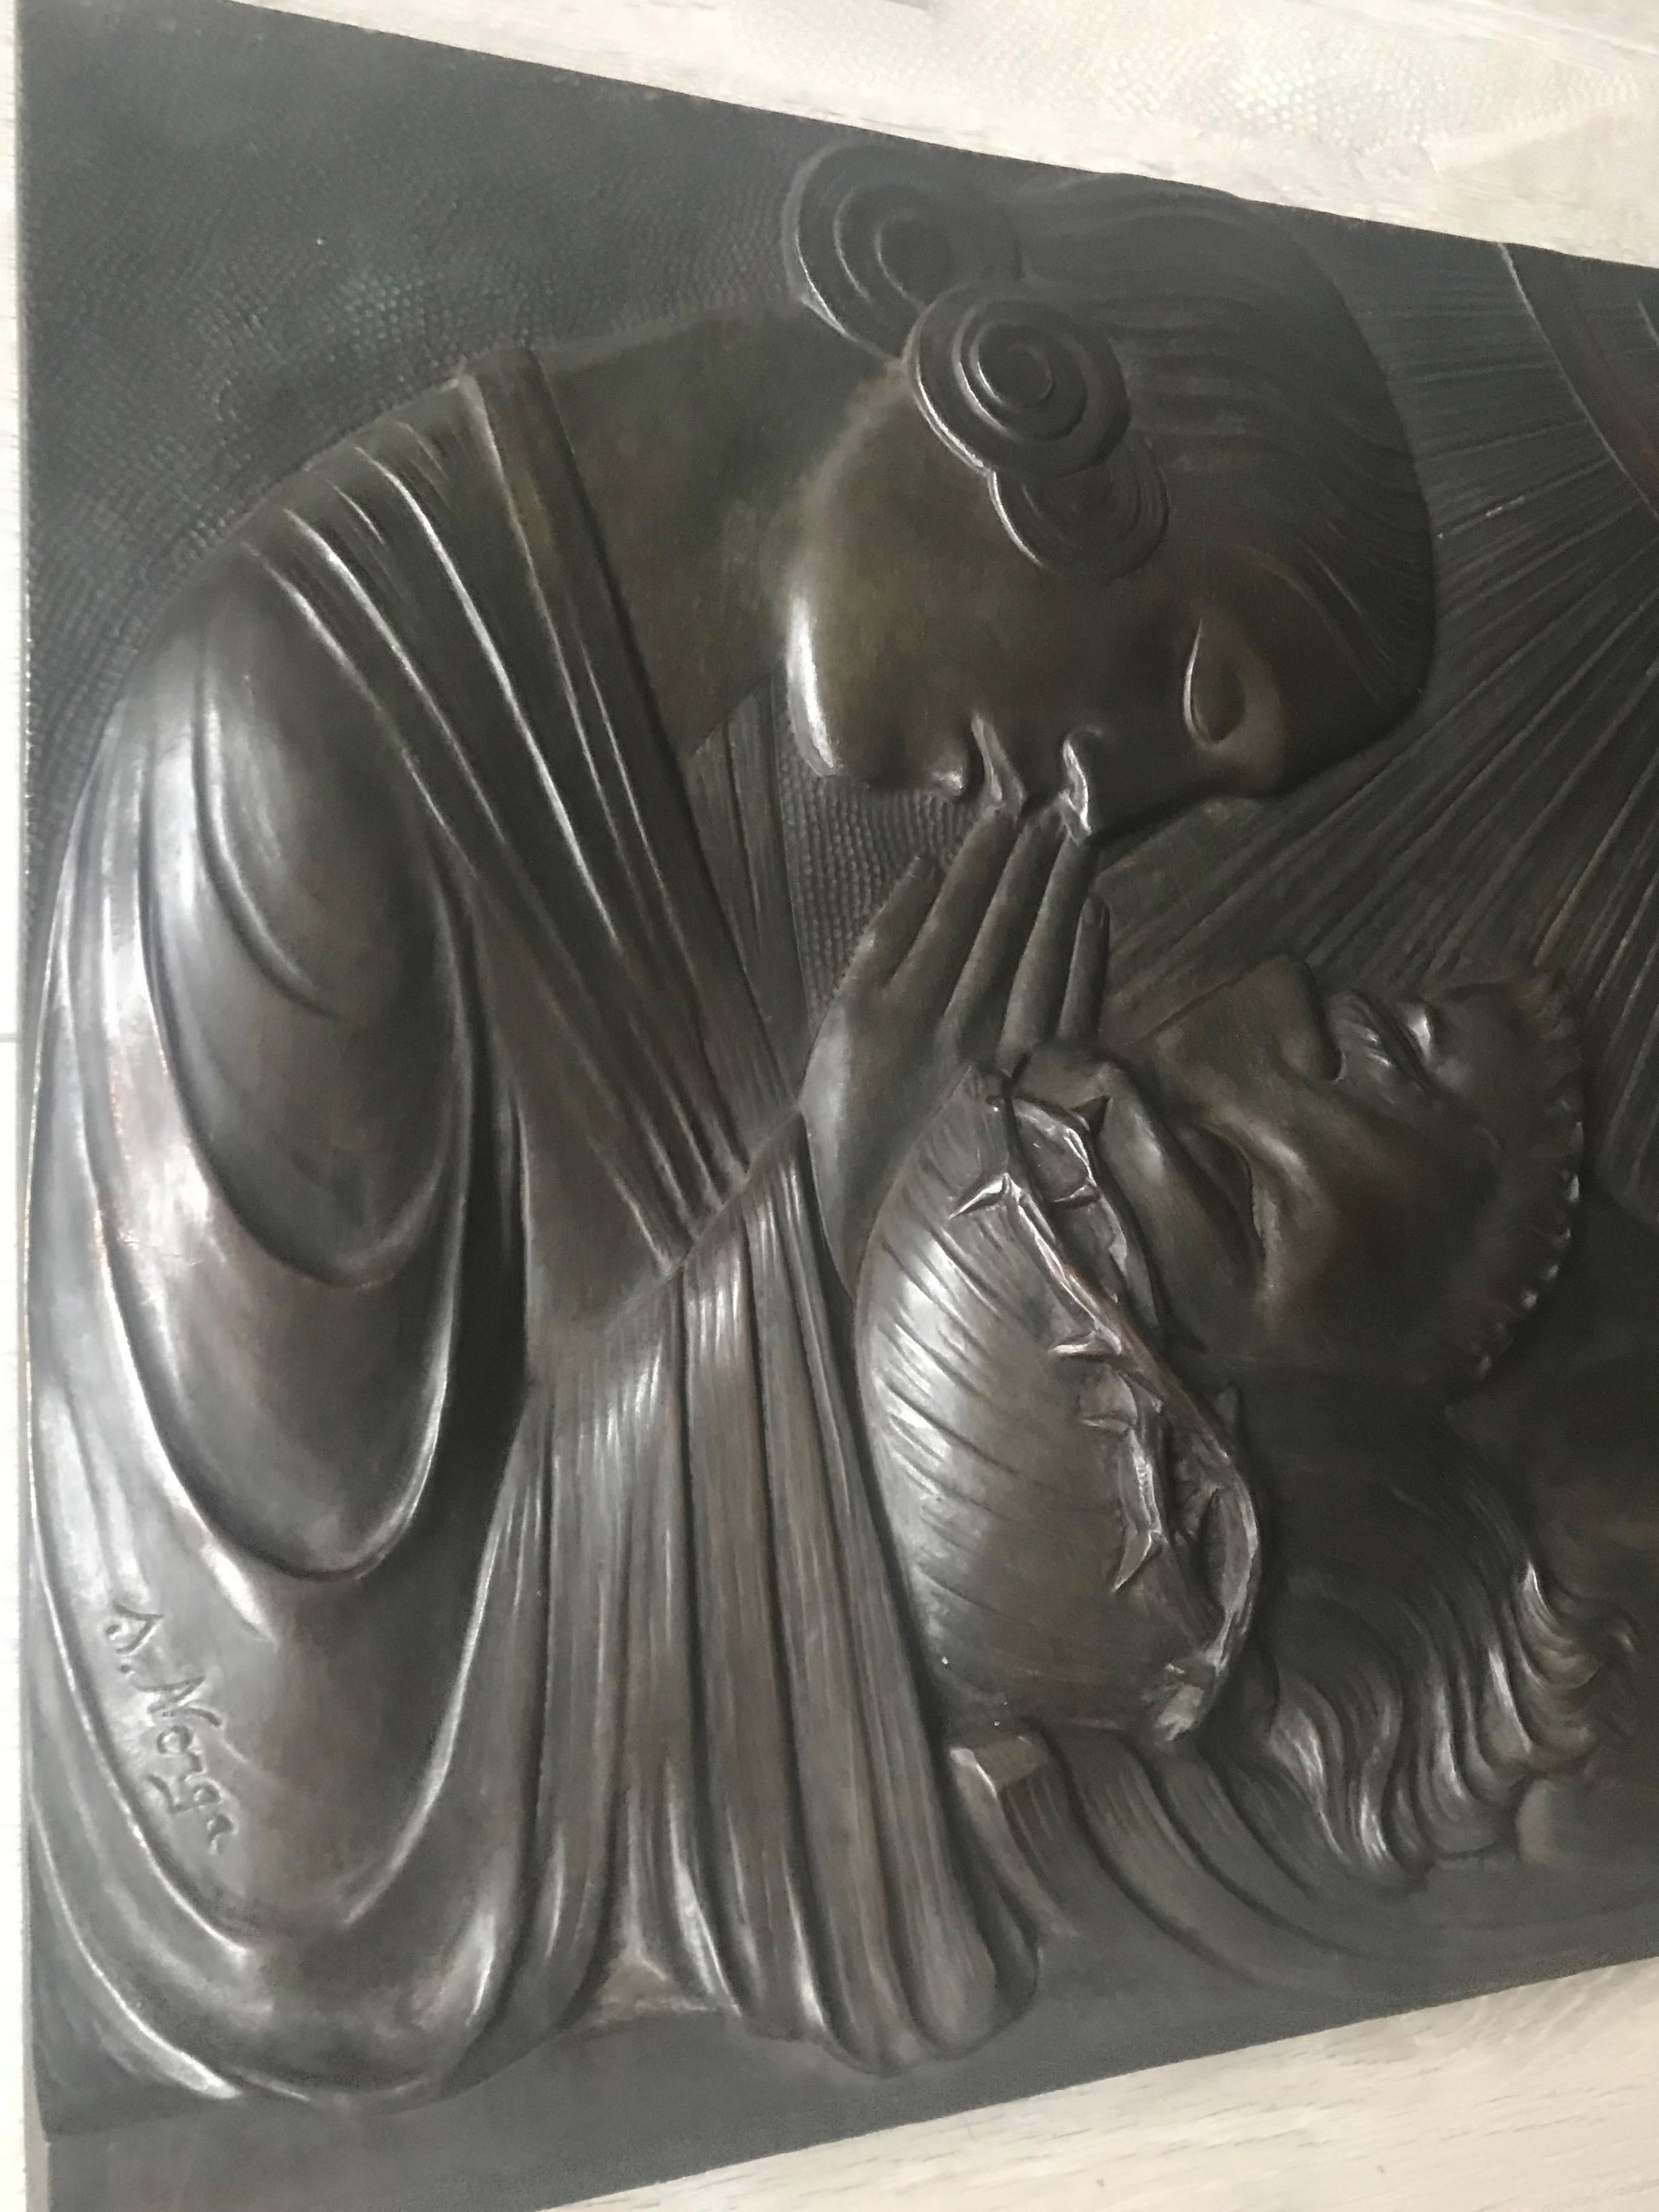 20th Century Large Early 1900 Art Nouveau Bronze Wall Plaque the Pieta' by Sylvain Norga